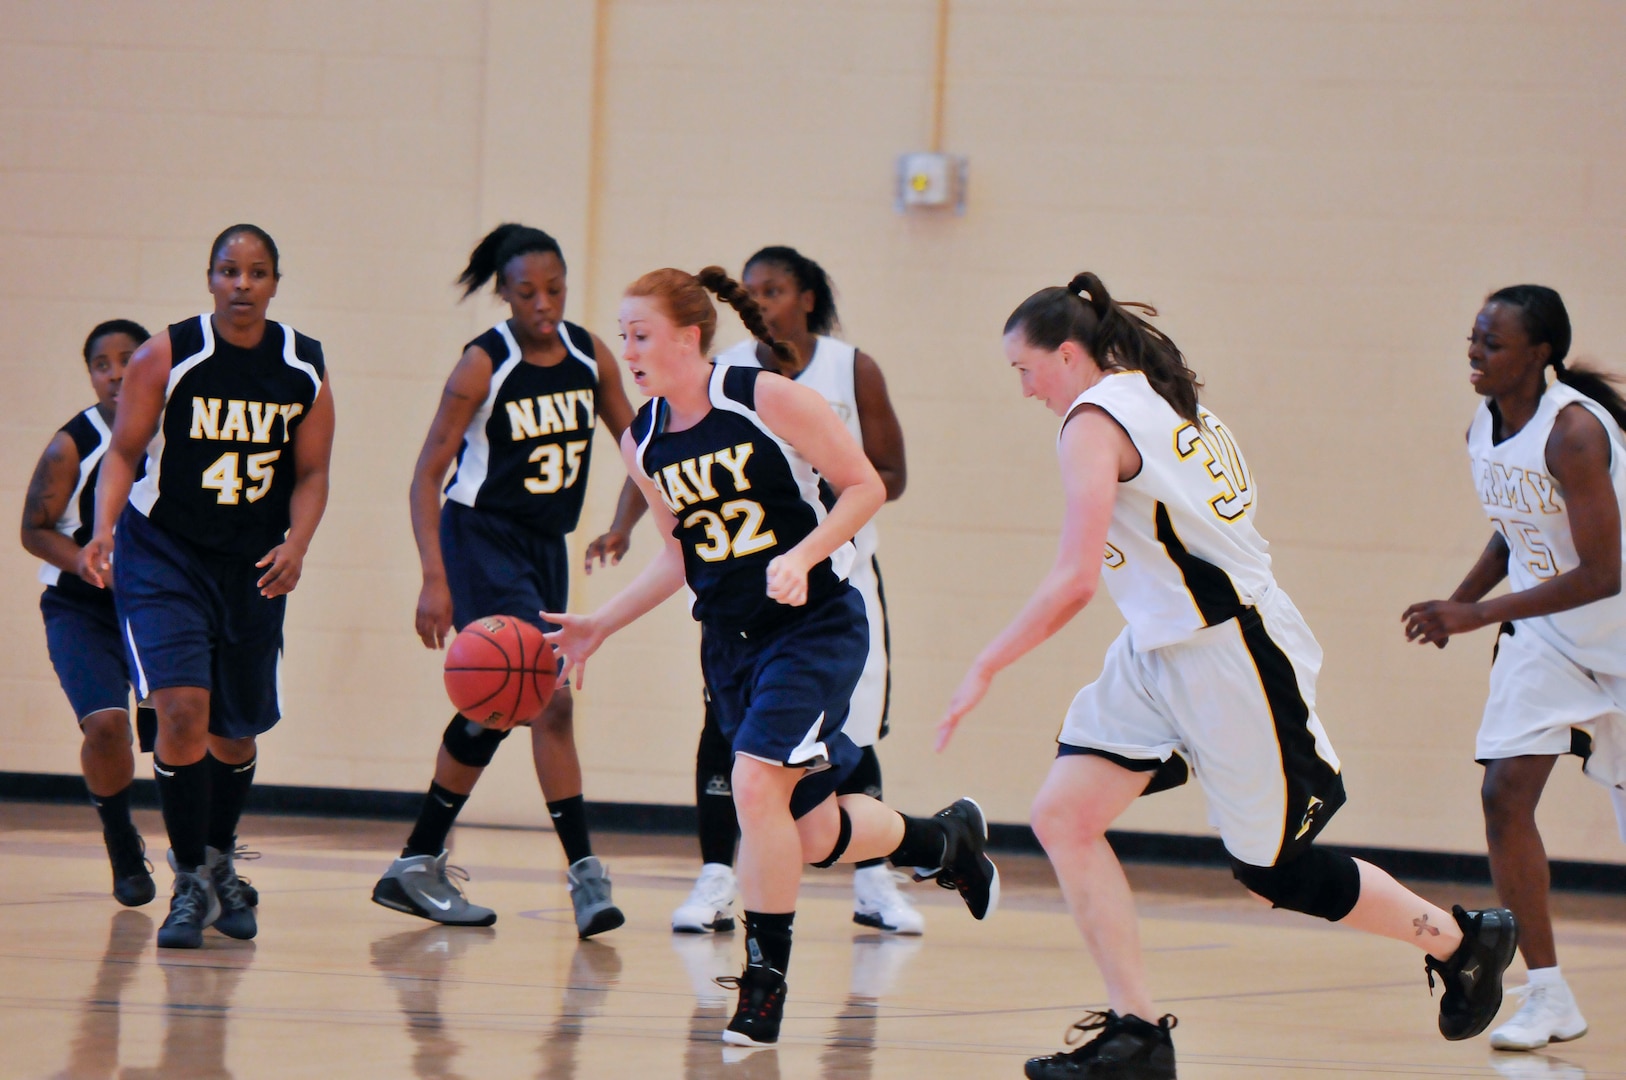 2012 Armed Forces Basketball Women's Championship